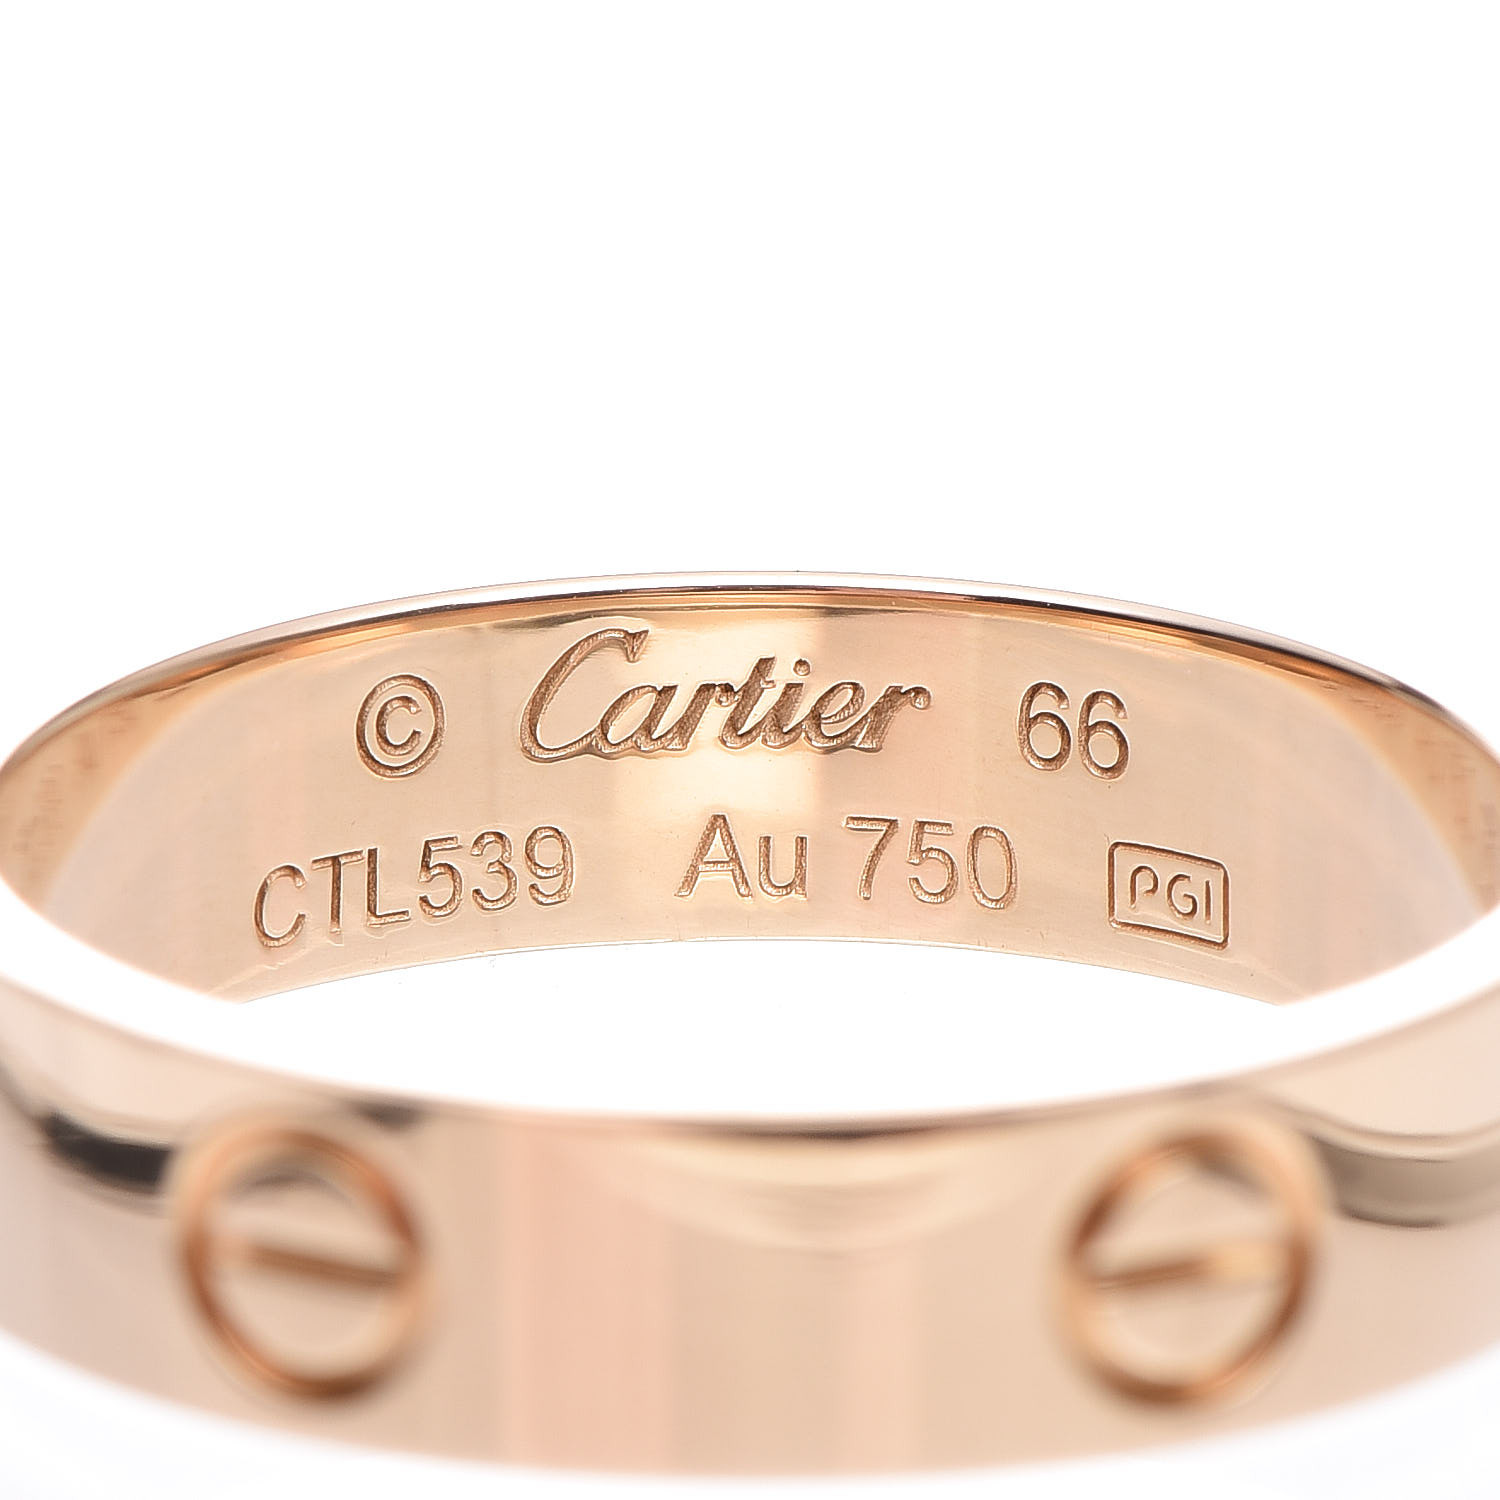 CARTIER 18K Yellow Gold 5.5mm Love Ring 66 11.5 365972